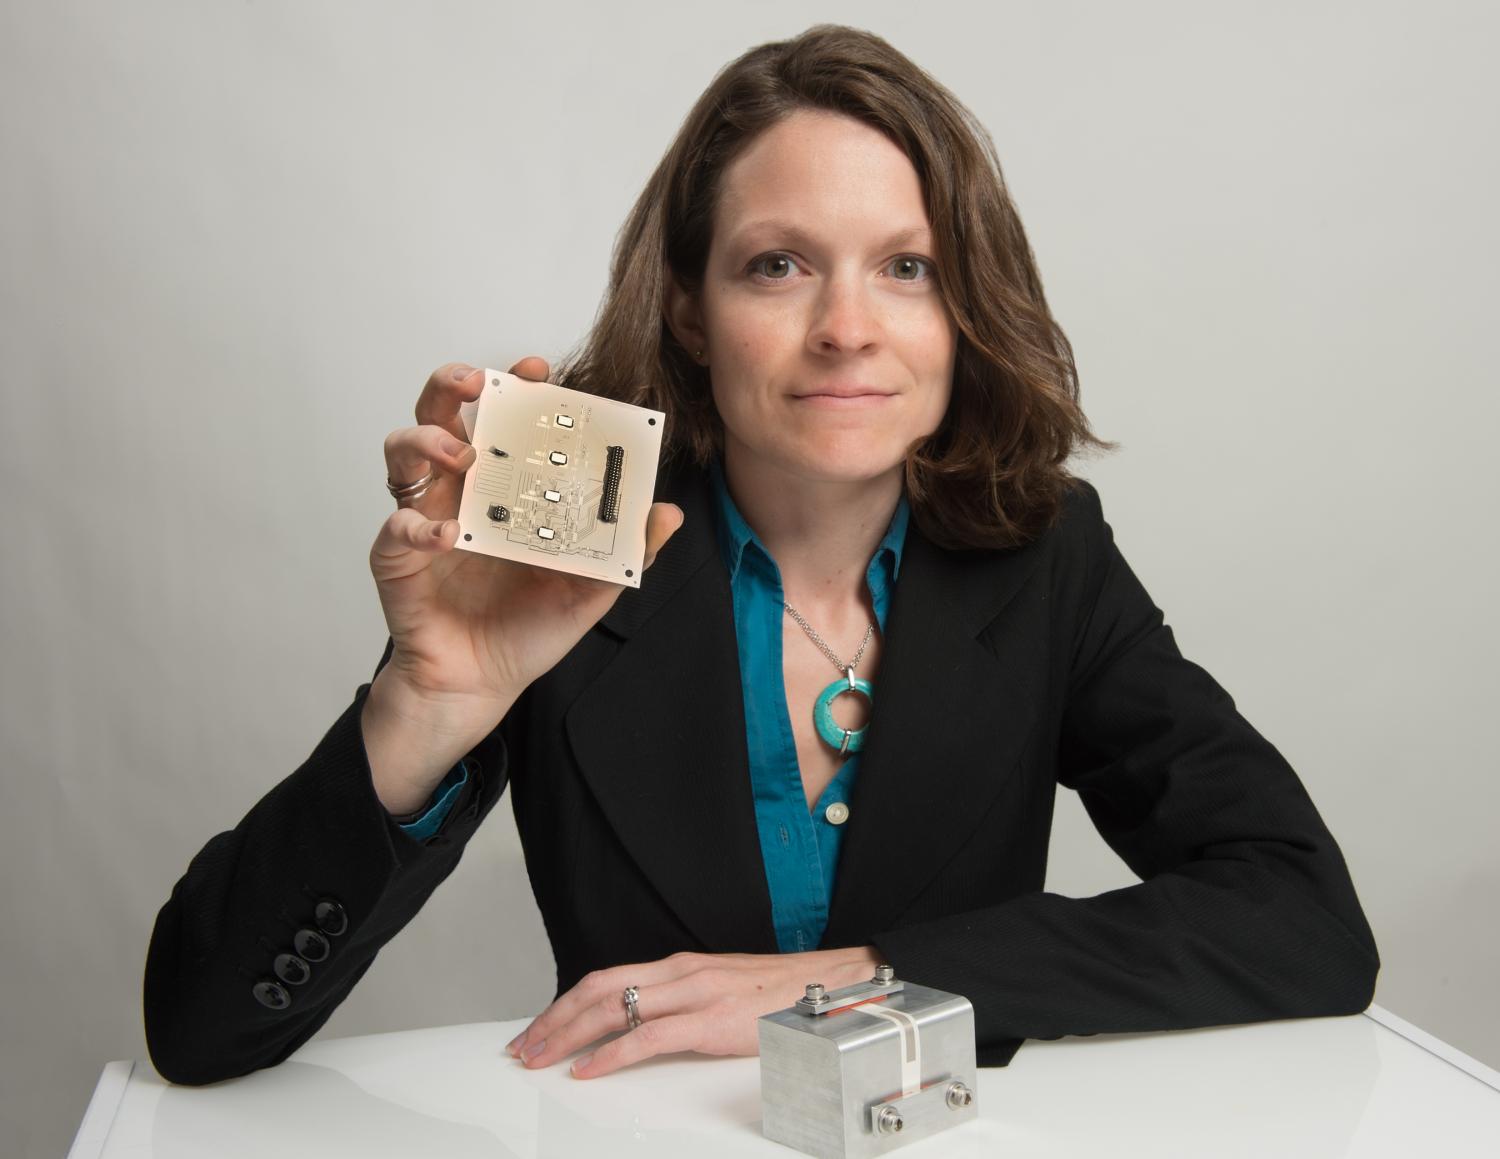  NASA Goddard technologist Beth Paquette shows a 3D printed object including circuit paths 